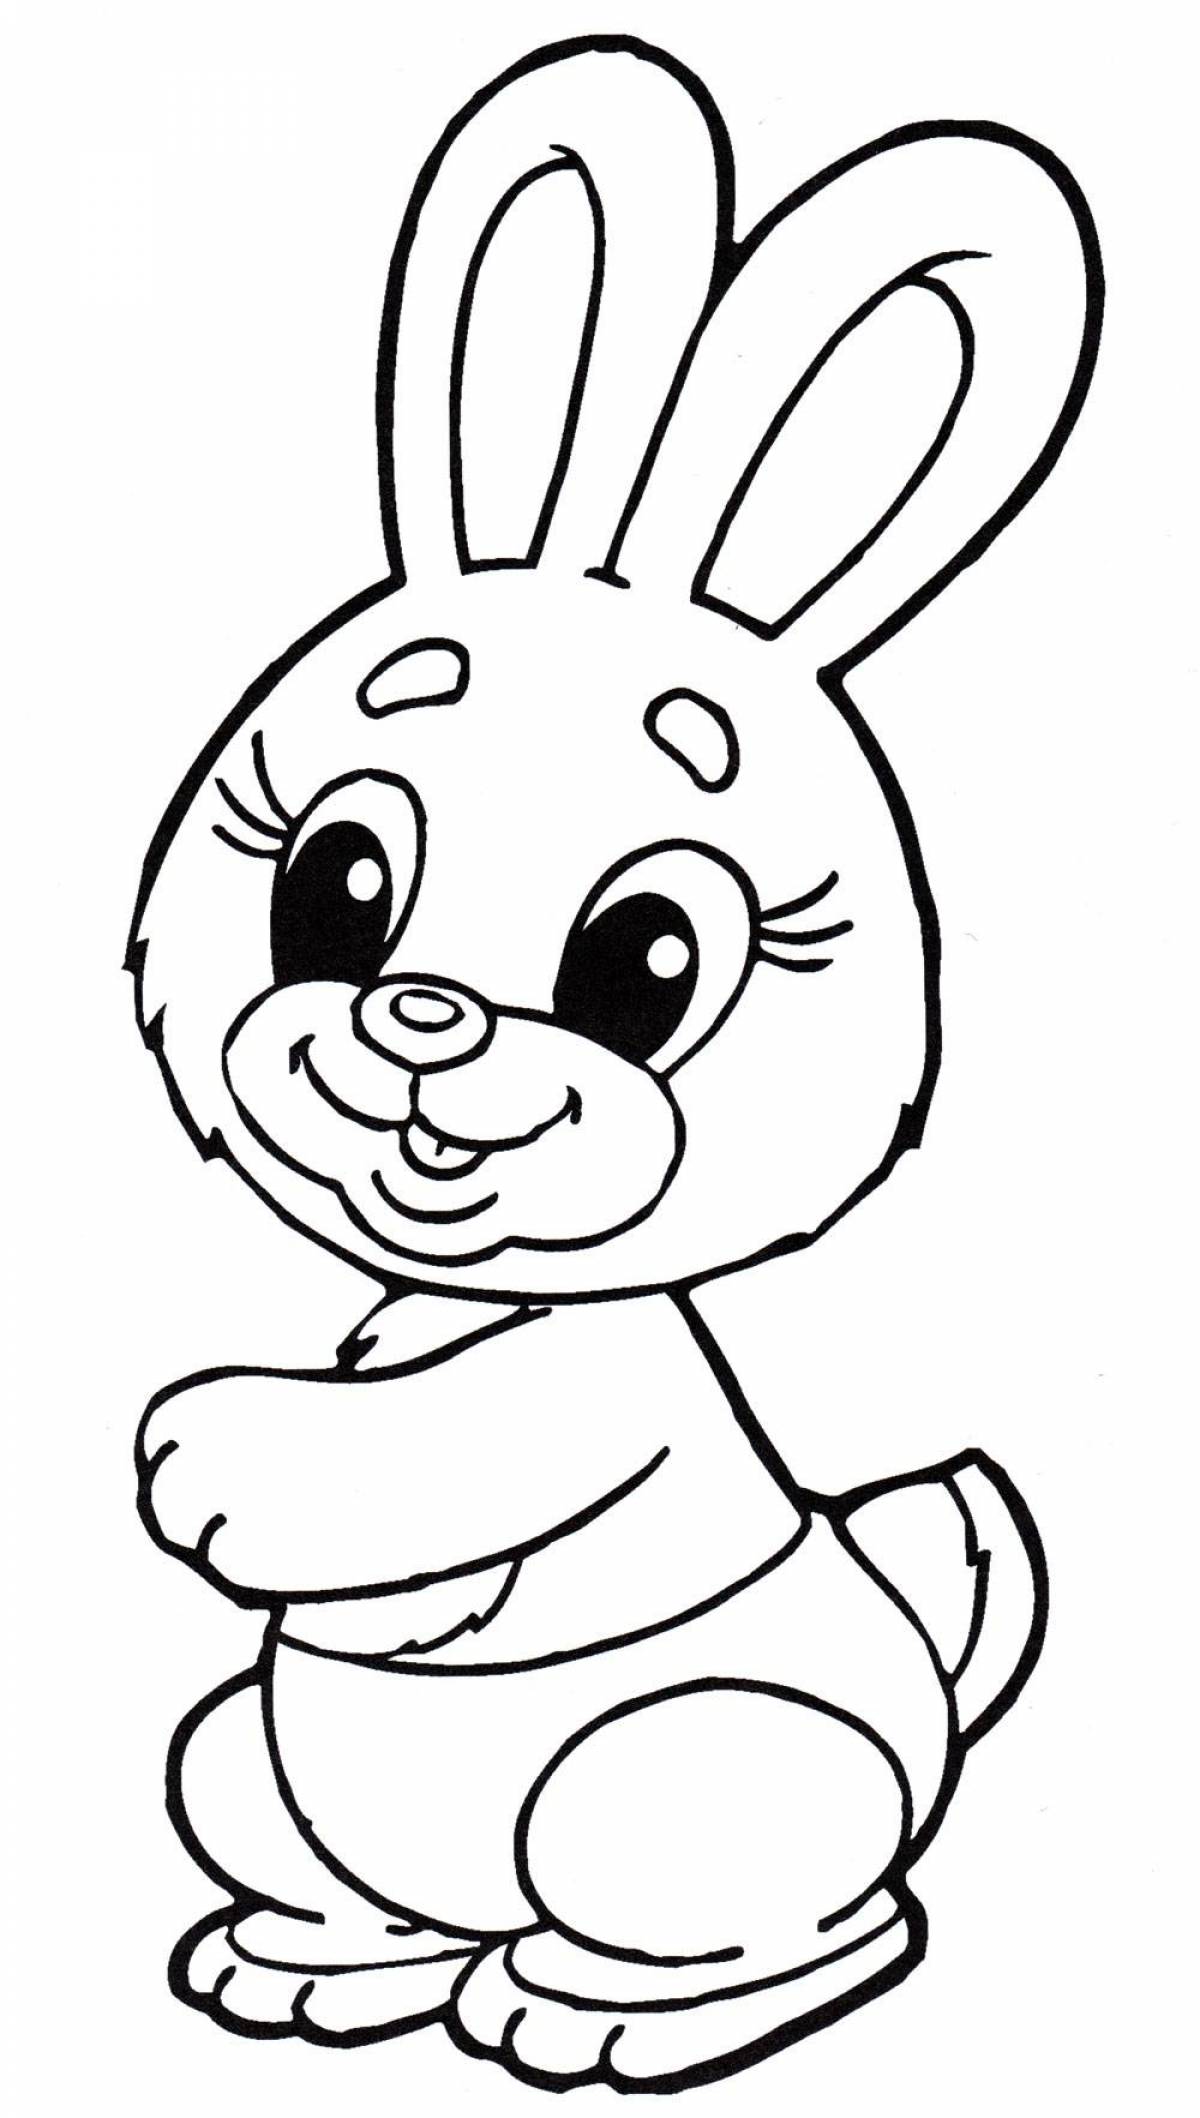 Live coloring rabbit for children 3-4 years old